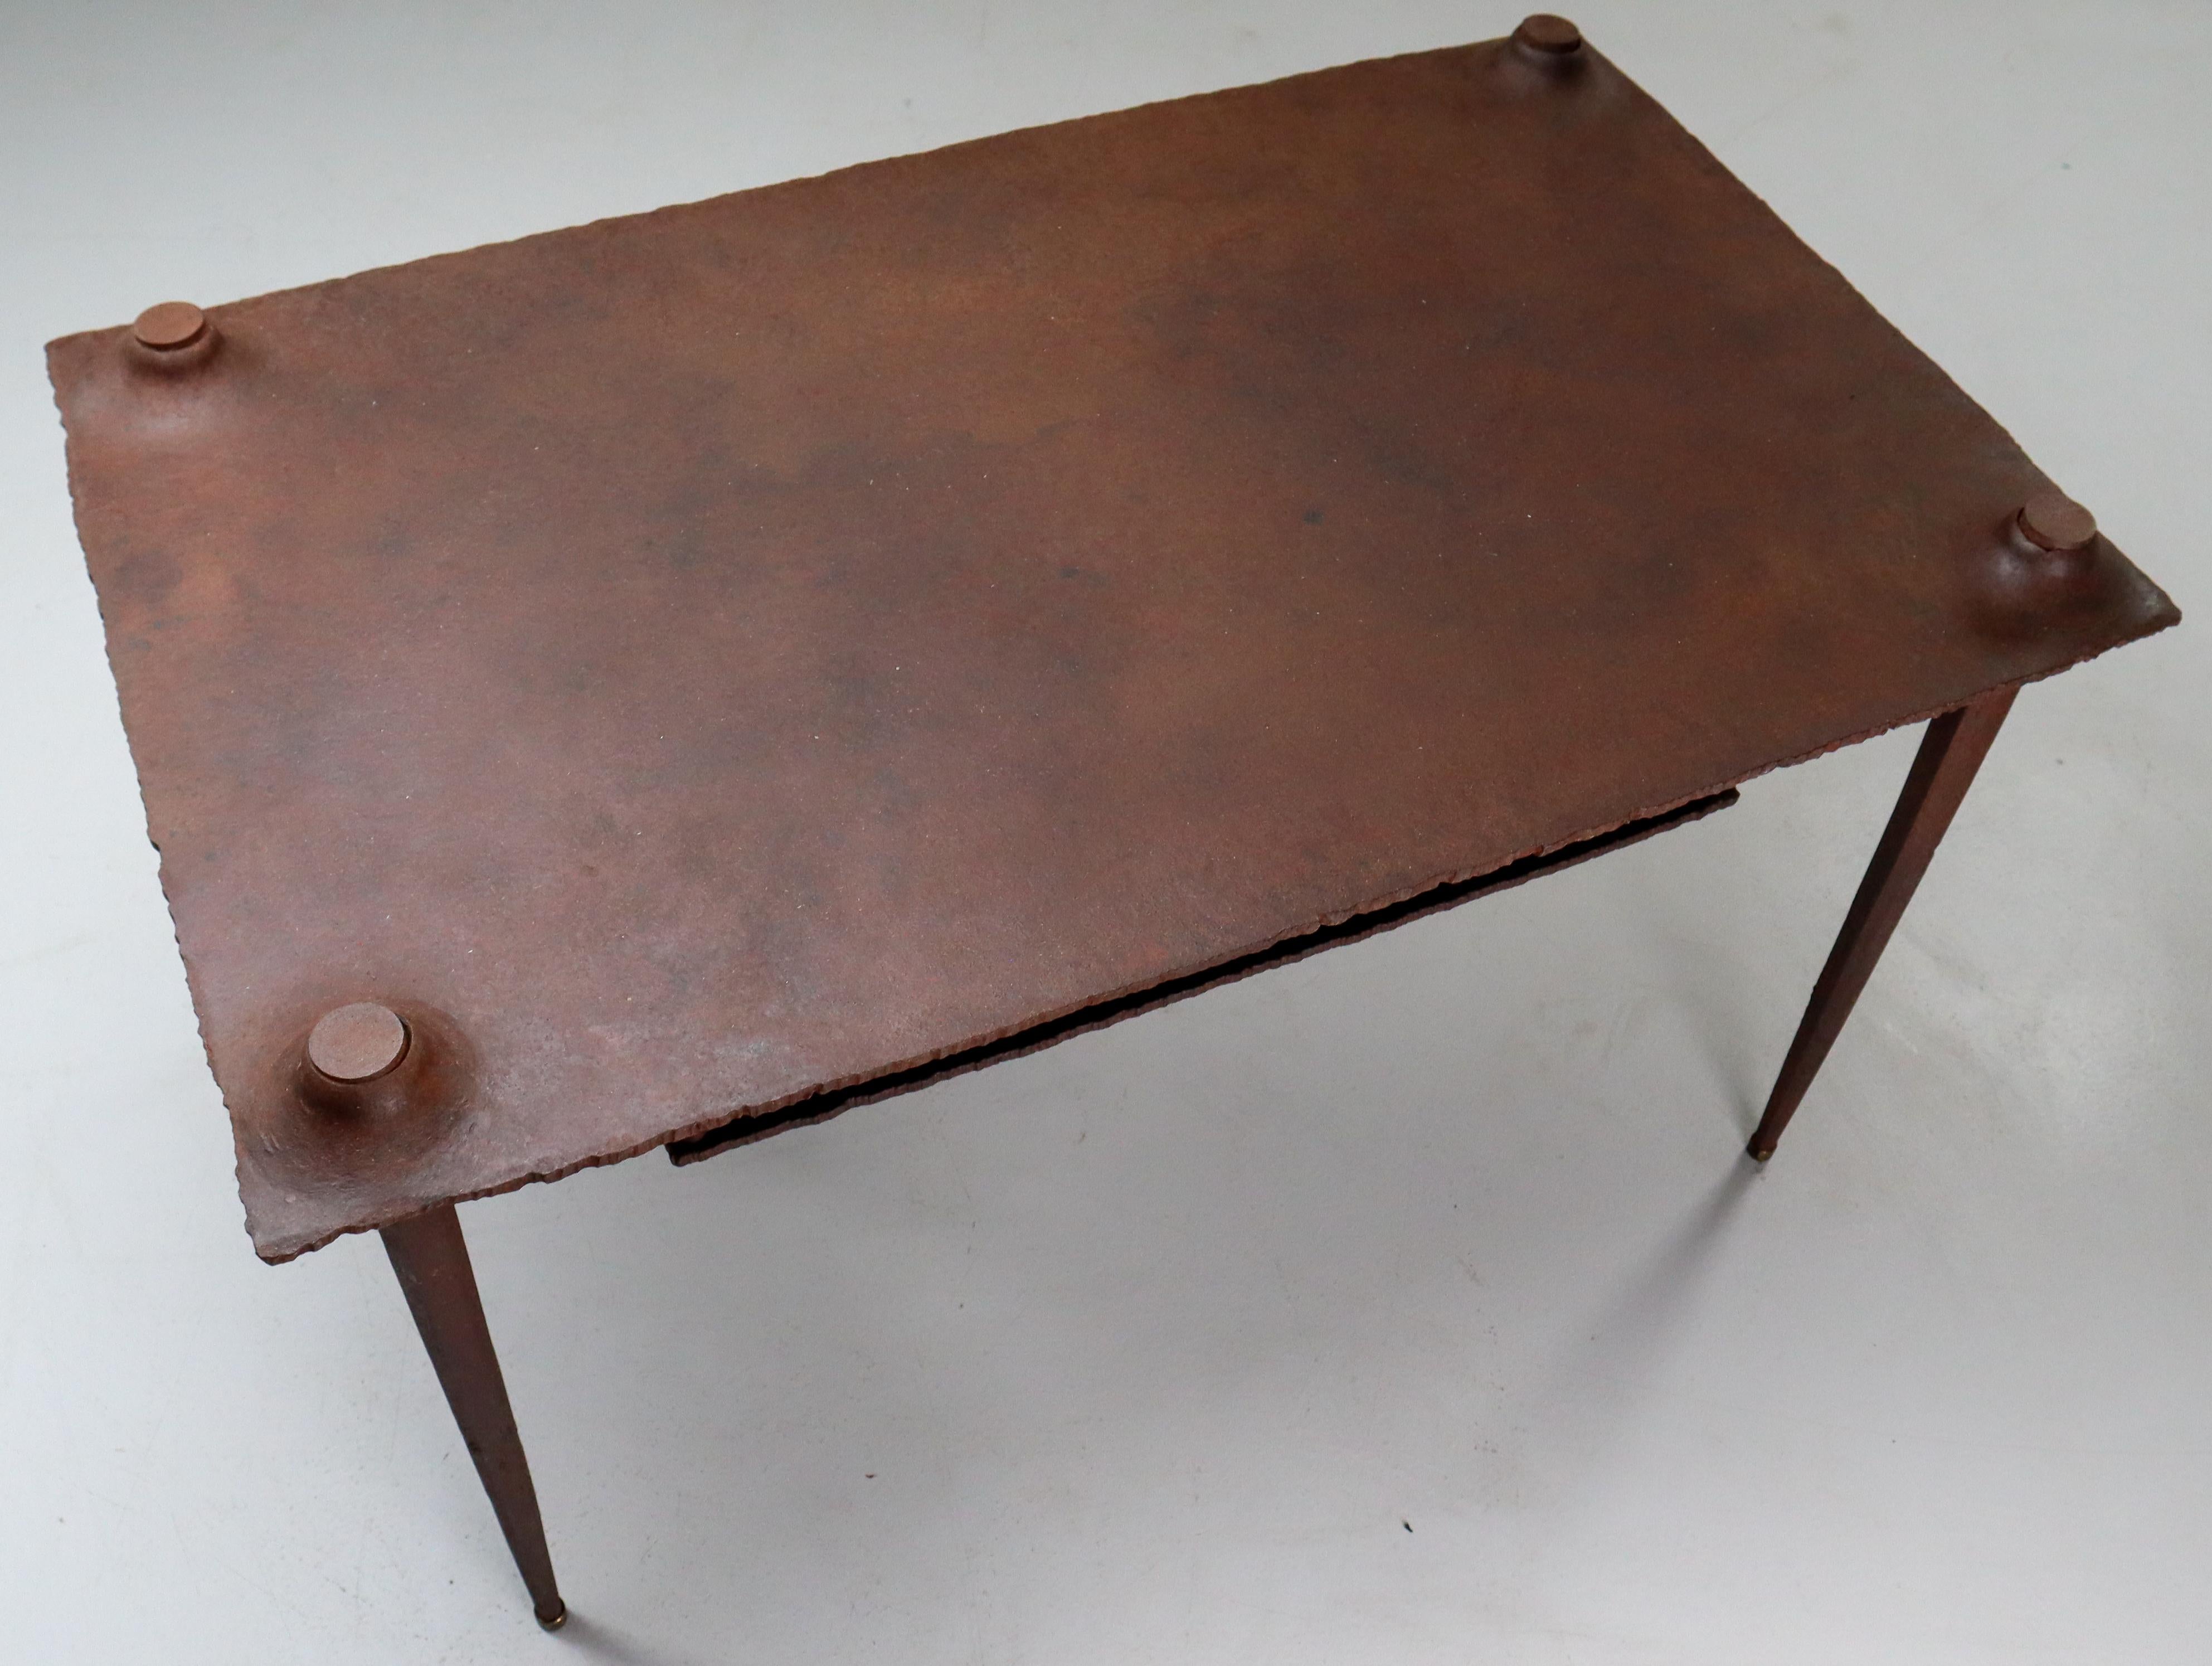 Brutalist table with shelf for magazines by Idir Mecibah (1958-2013), produced by Smederij Moerman, 1998. This solid steel table is from the scrab series. Mecibah designed the scrab series in the late 1980s and the table has been produced till the